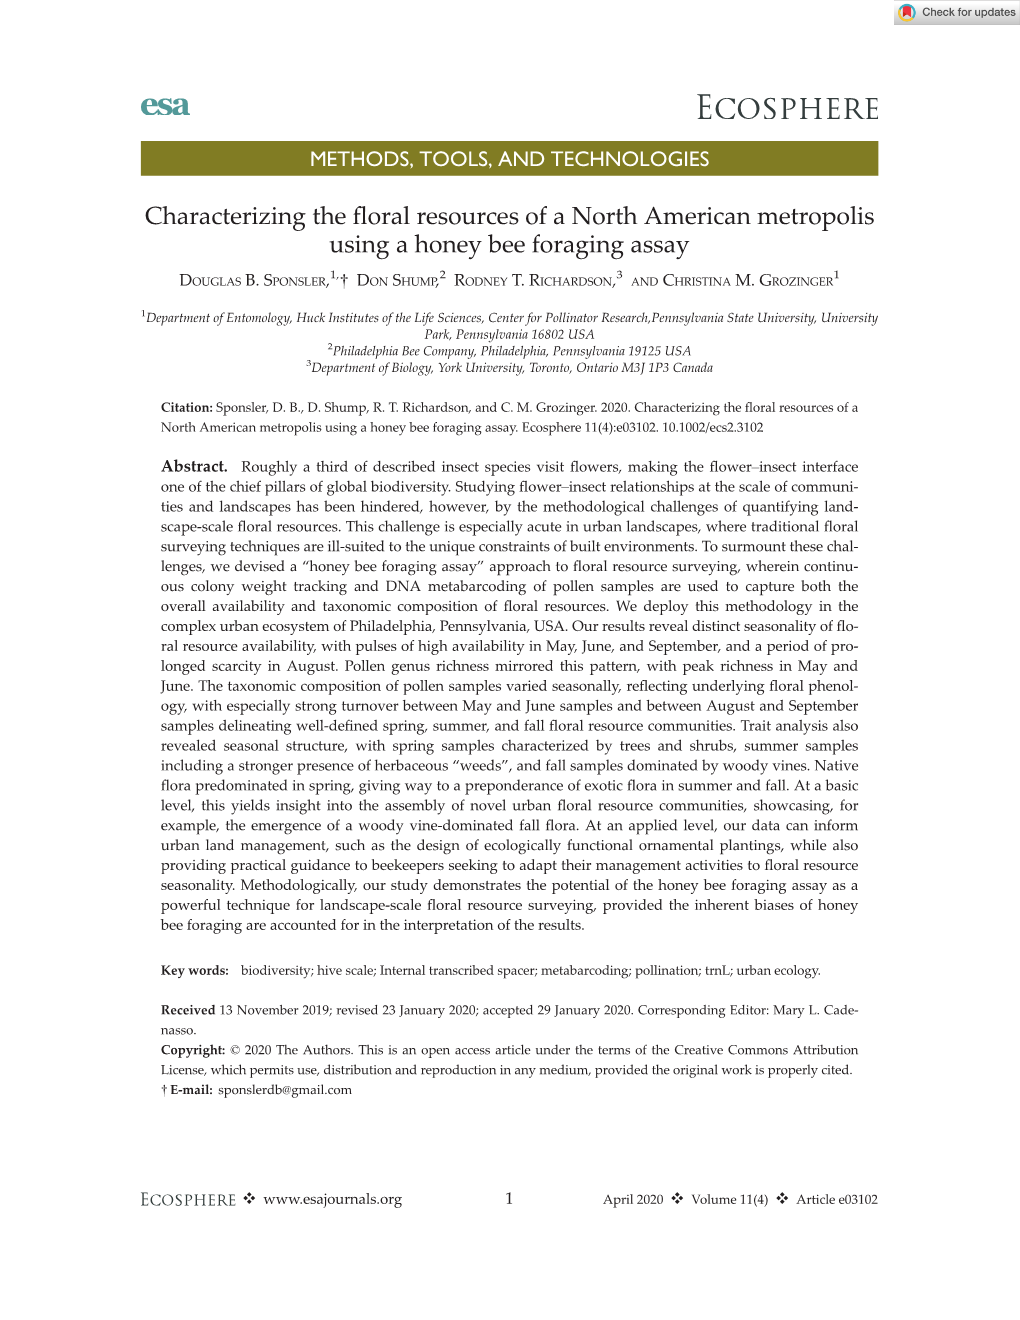 Characterizing the Floral Resources of a North American Metropolis Using